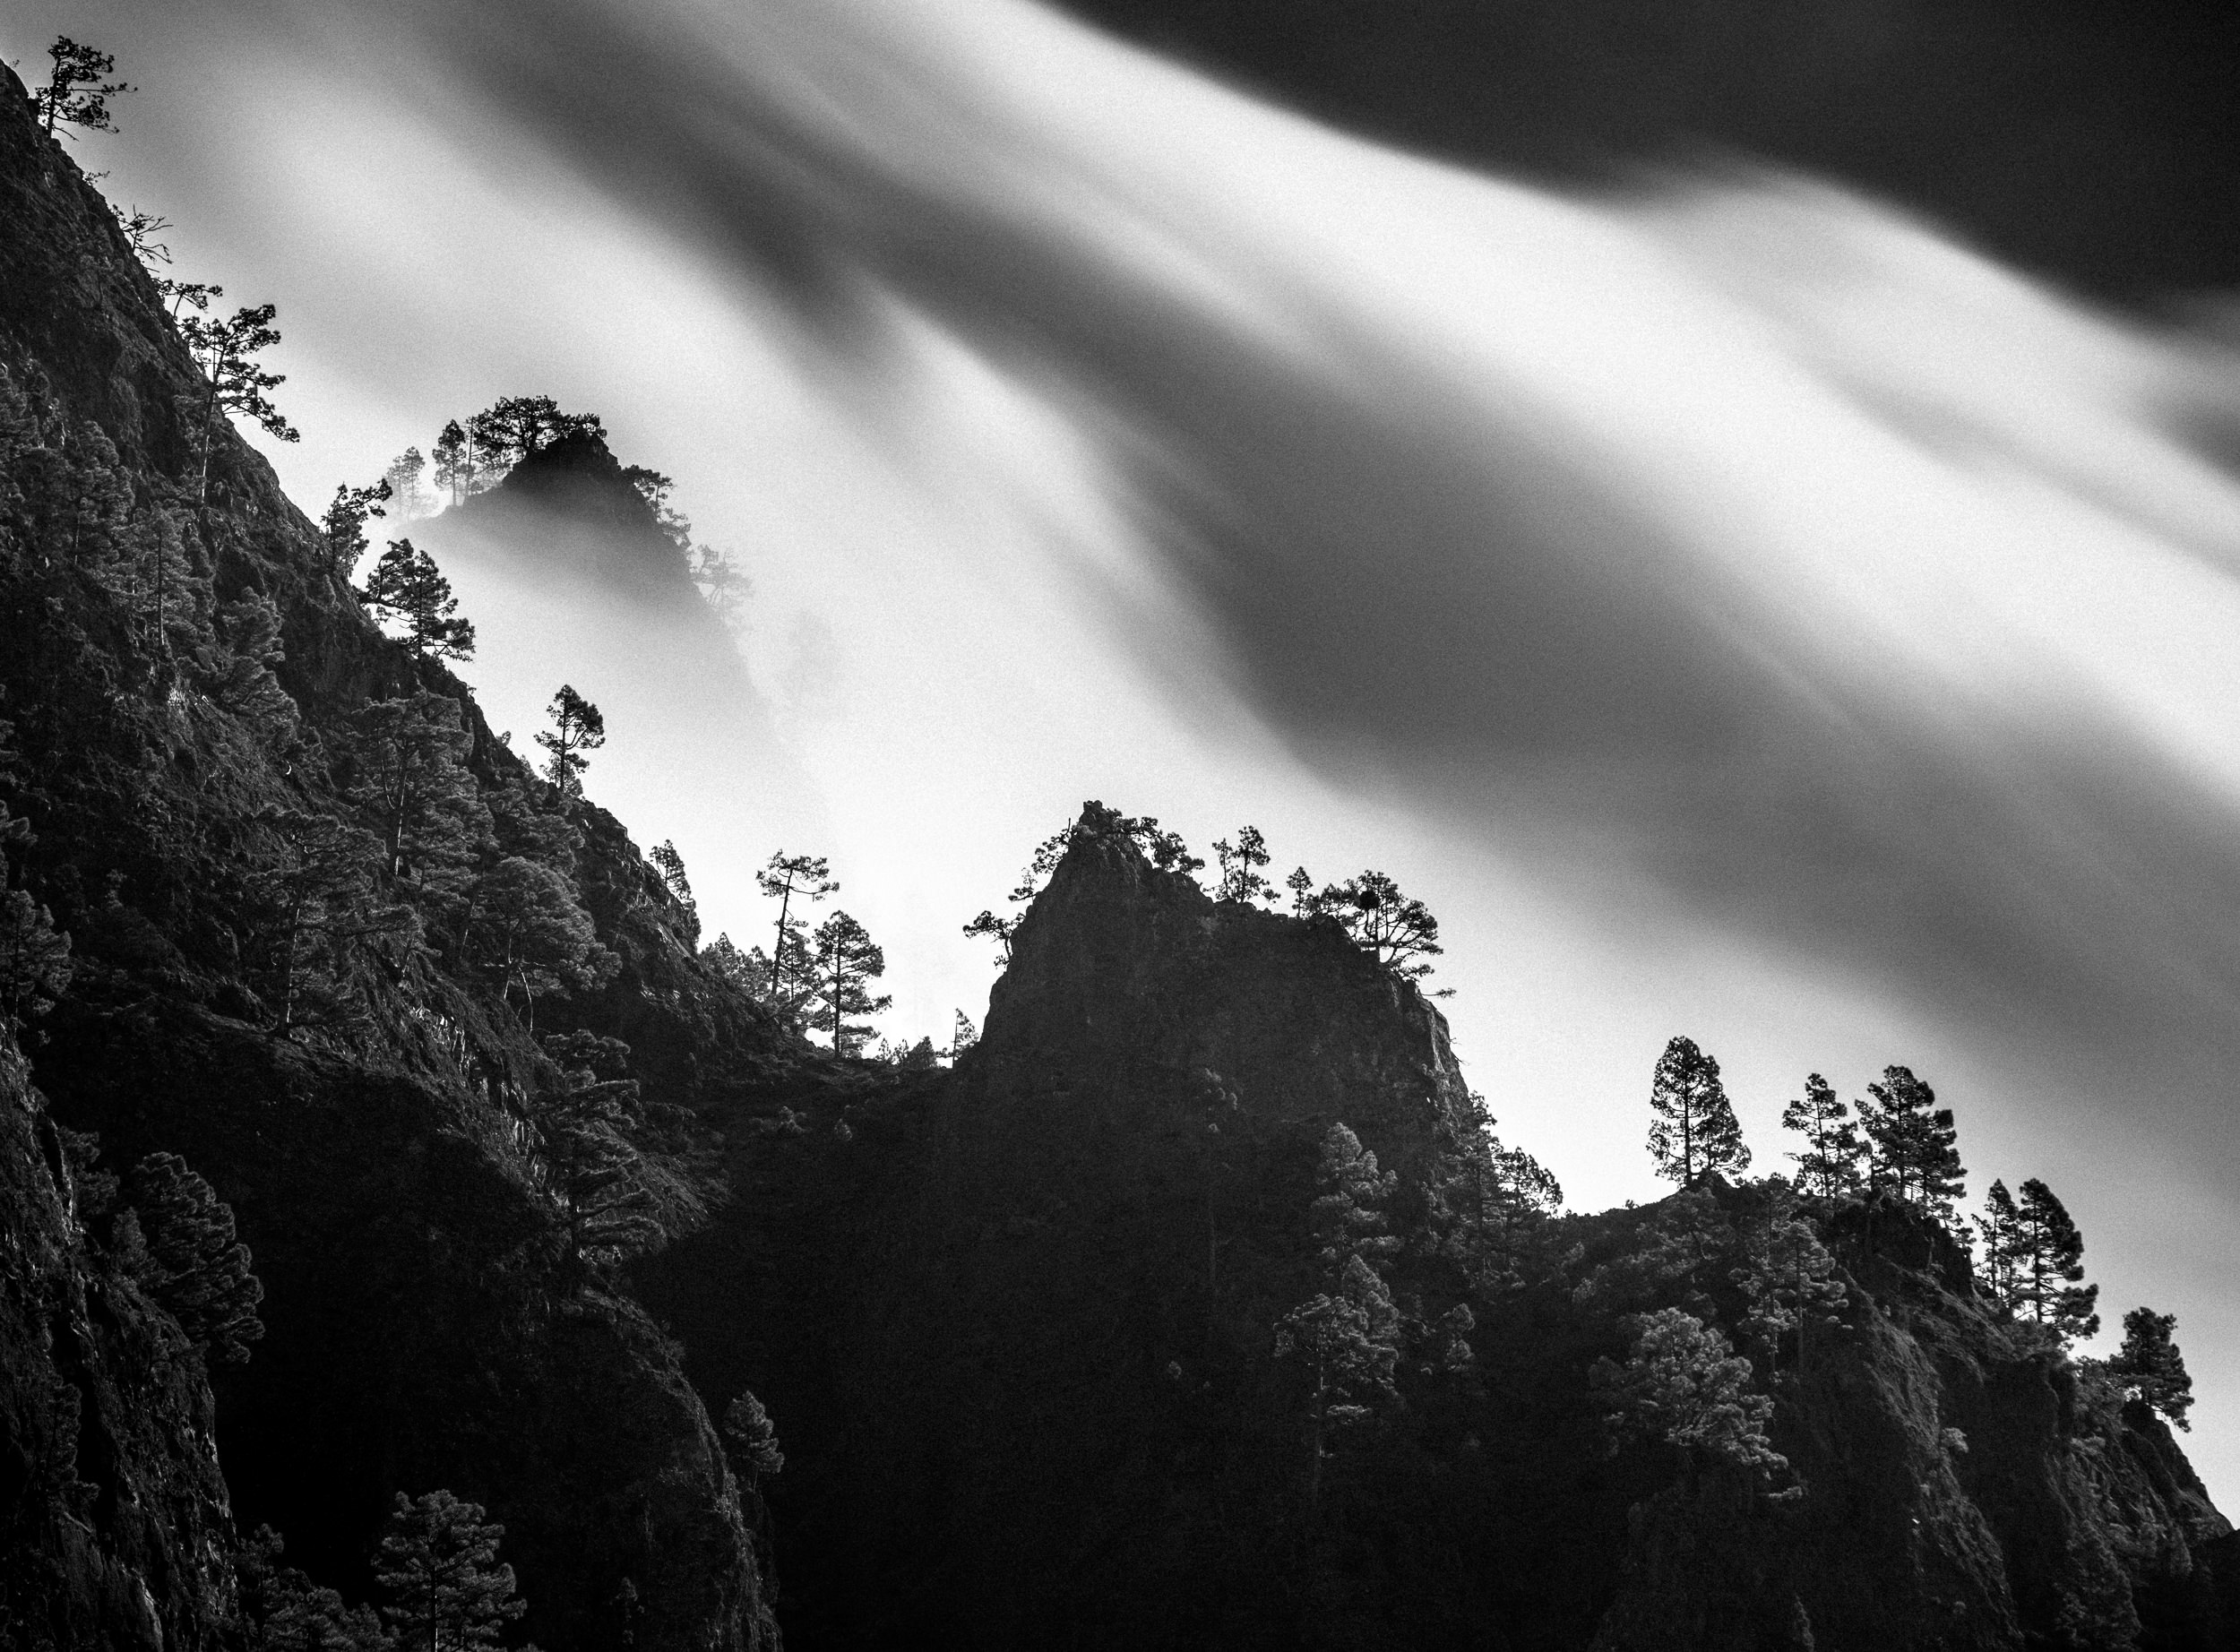 Use of telephoto lens to photograph forests from far away, La Palma island - Rafael Rojas.jpg